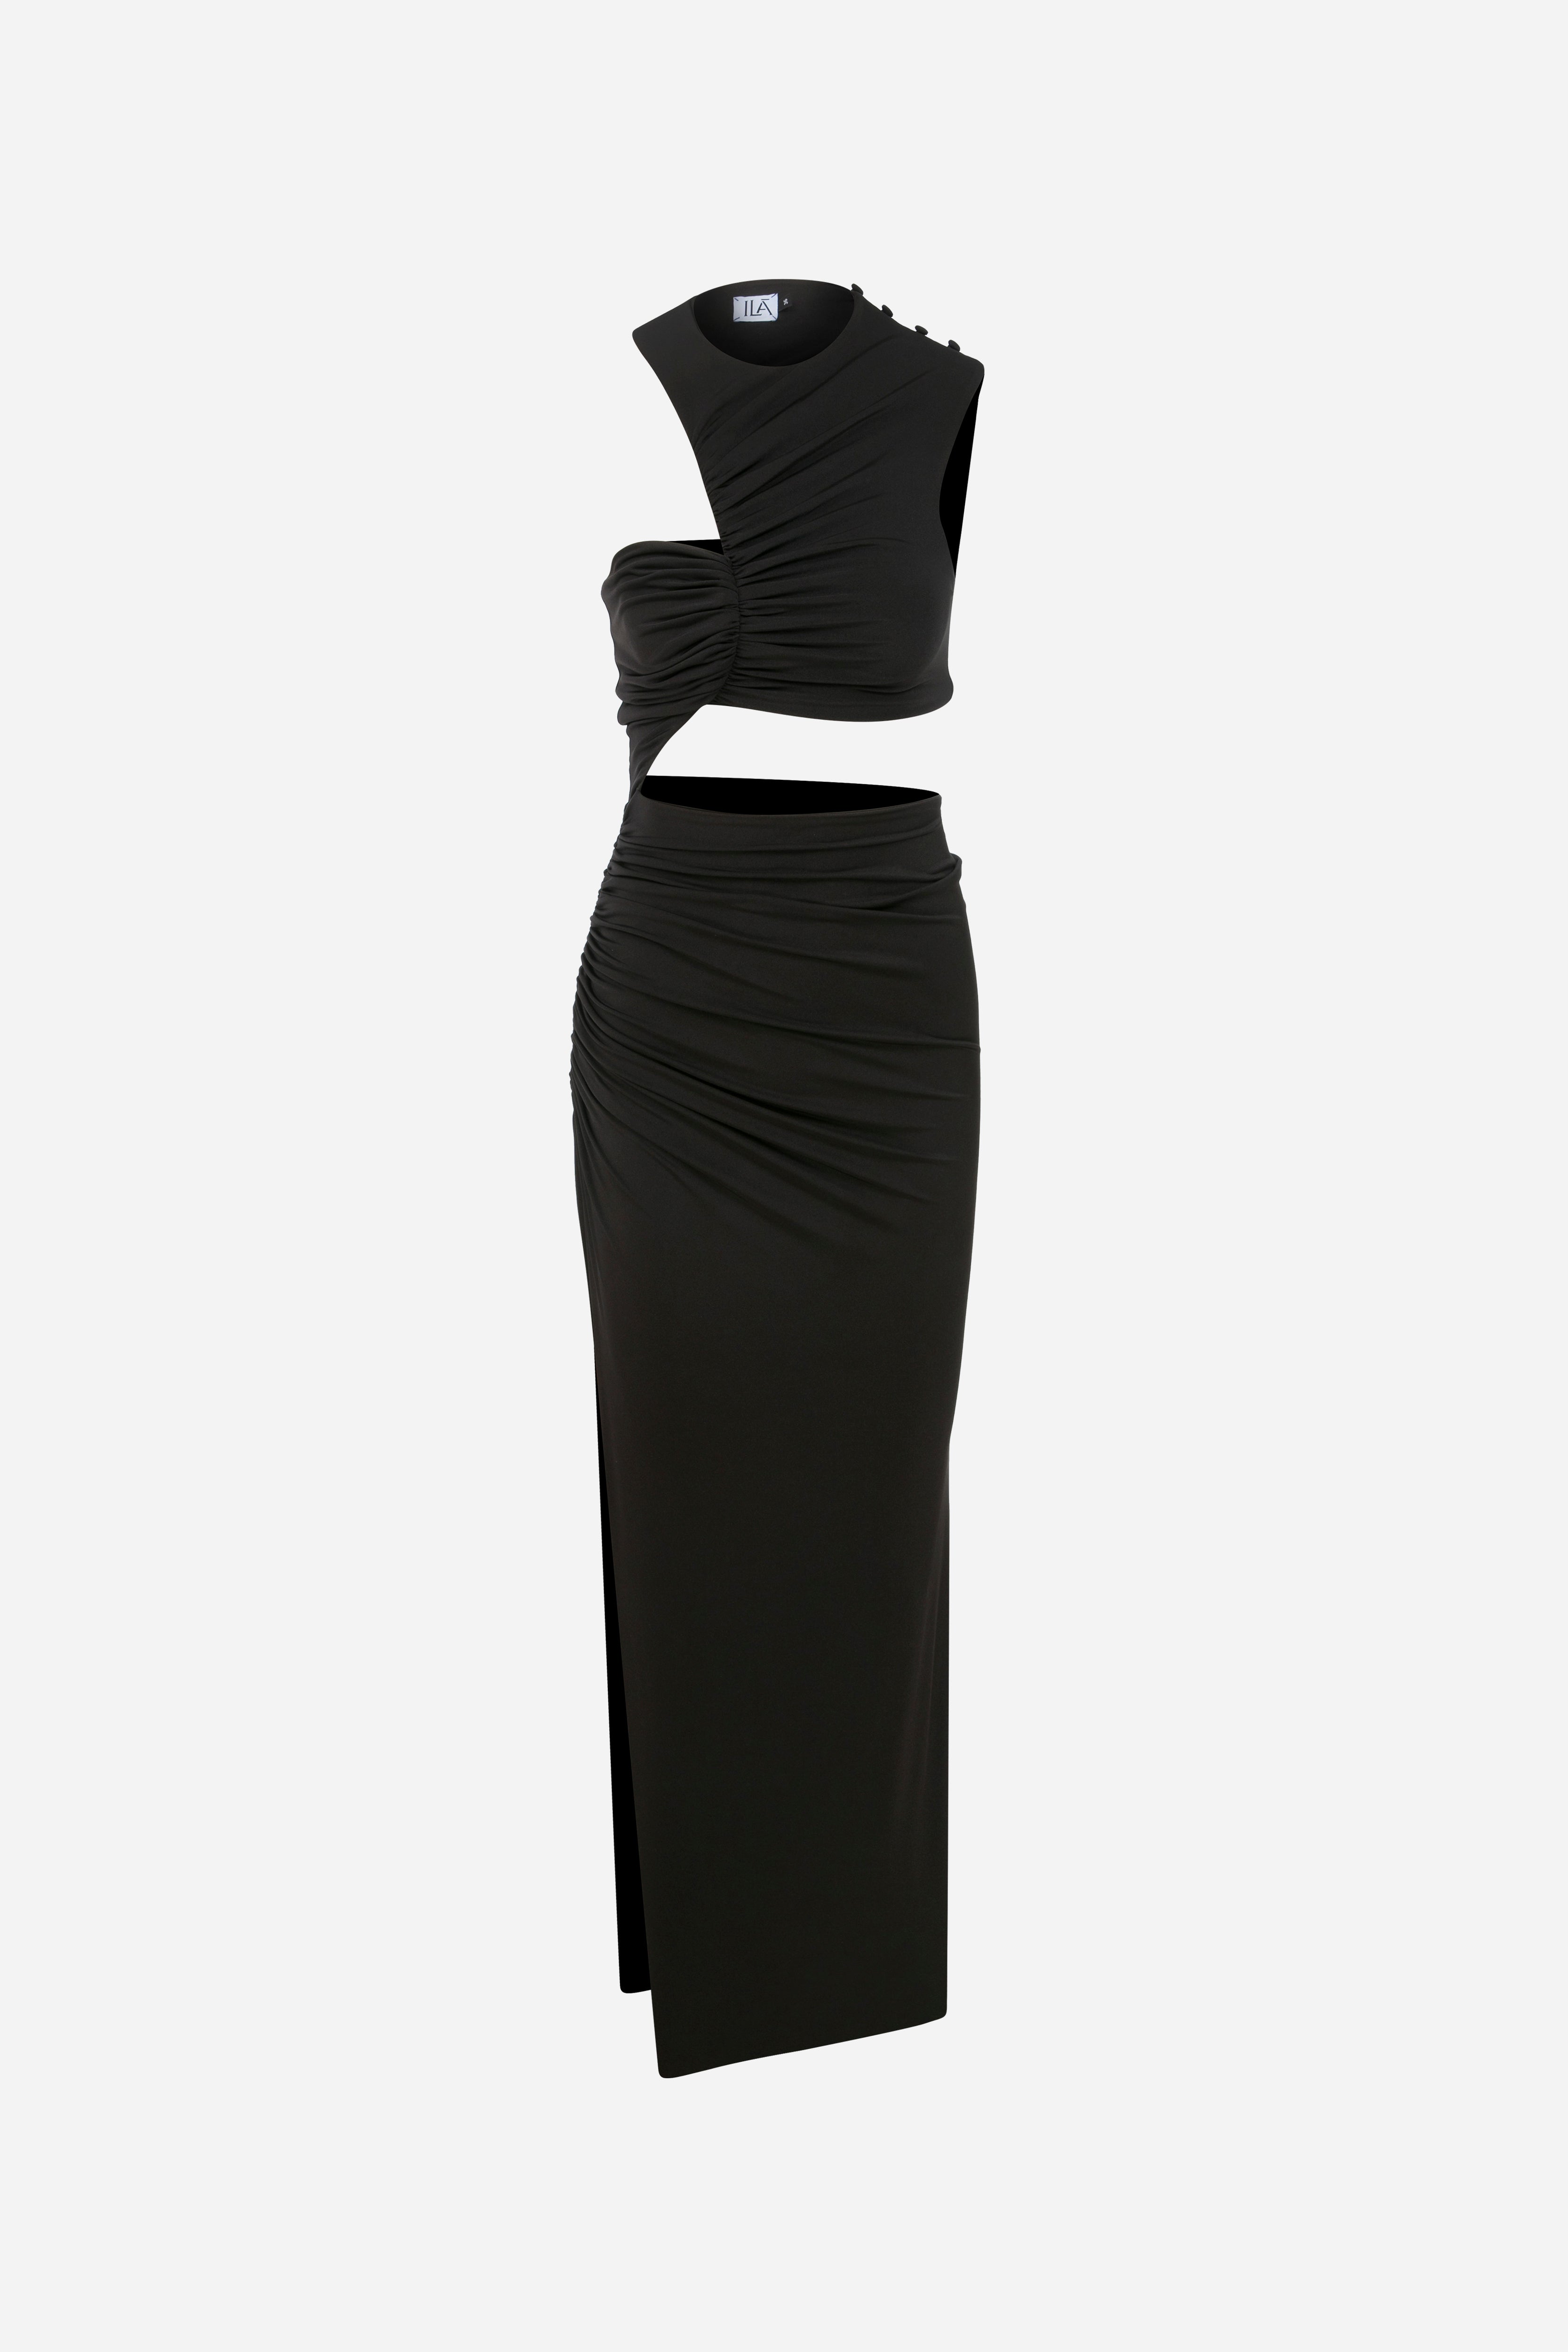 BLAIR - JERSEY DRESS WITH SIDE SLIT IN BLACK